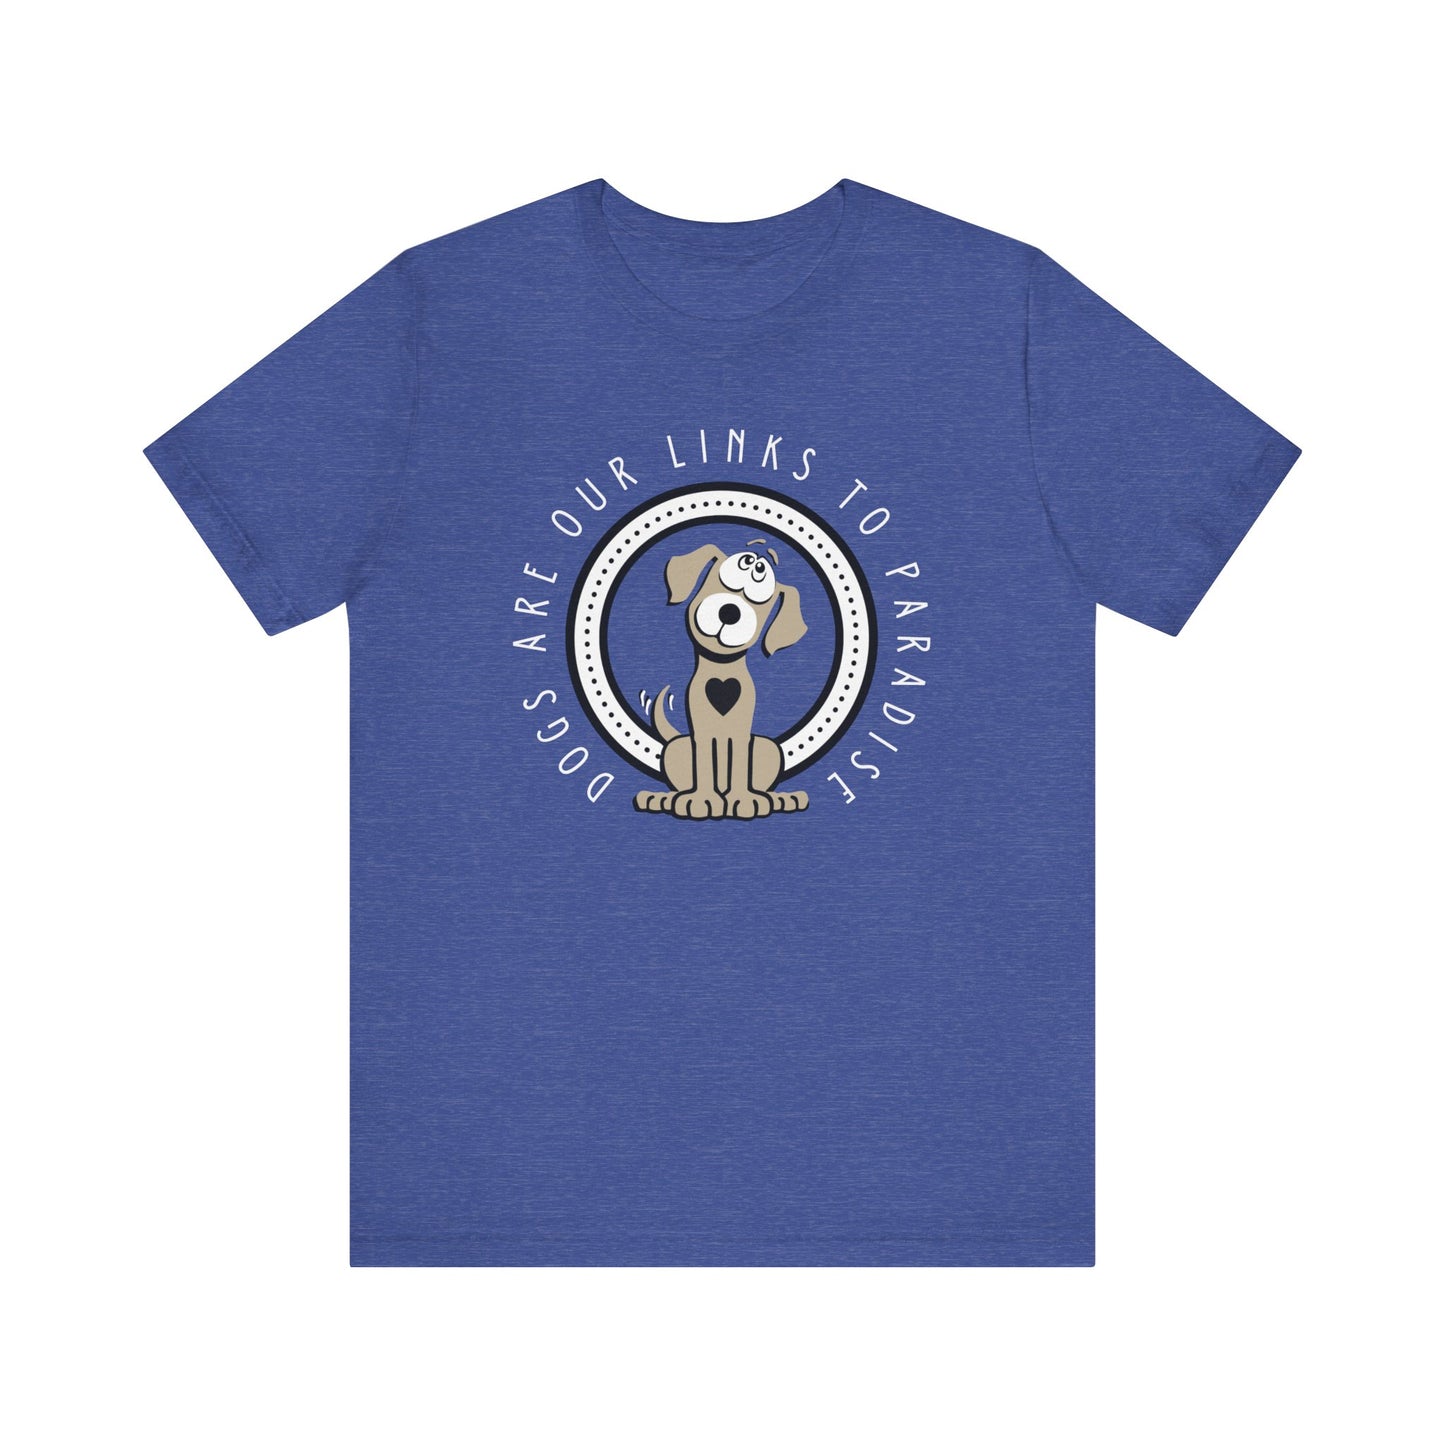 On a white surface, a heather true royal blue unisex tee by Dogs Pure Love, features a graphic and slogan; 'Dogs Are Our Links to Paradise.'